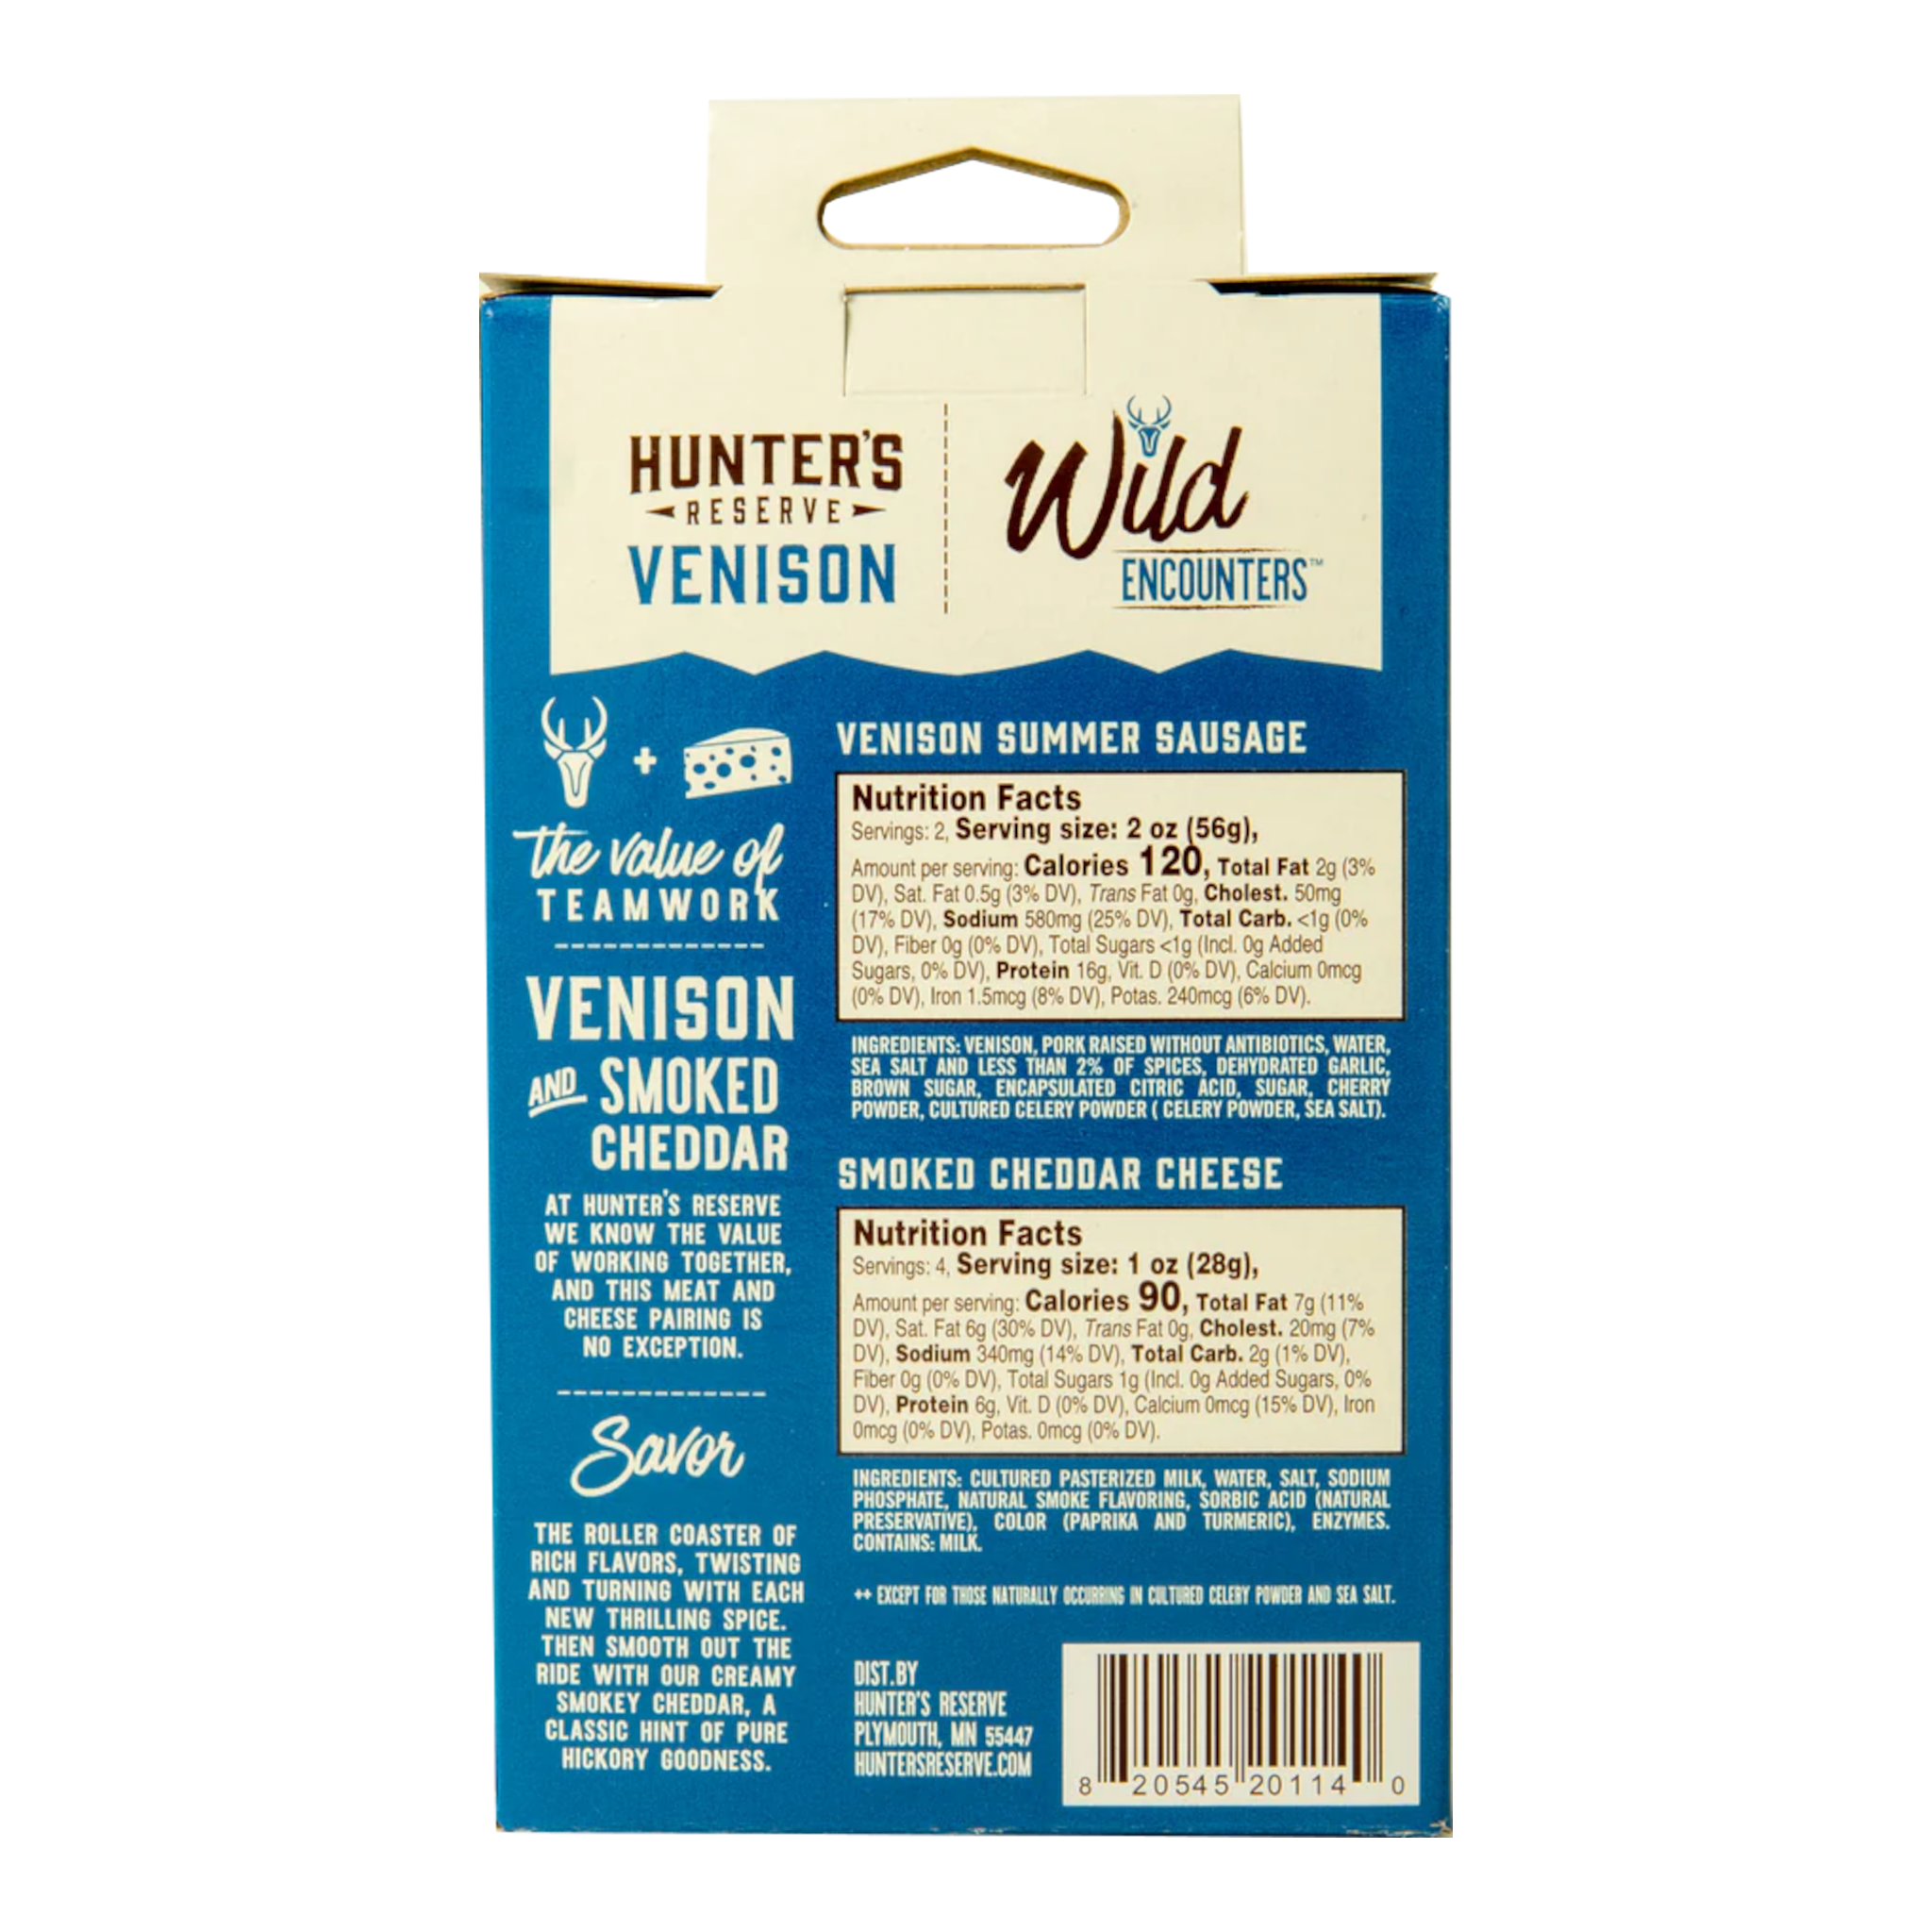 Venison & Smoked Cheddar Cheese Pack